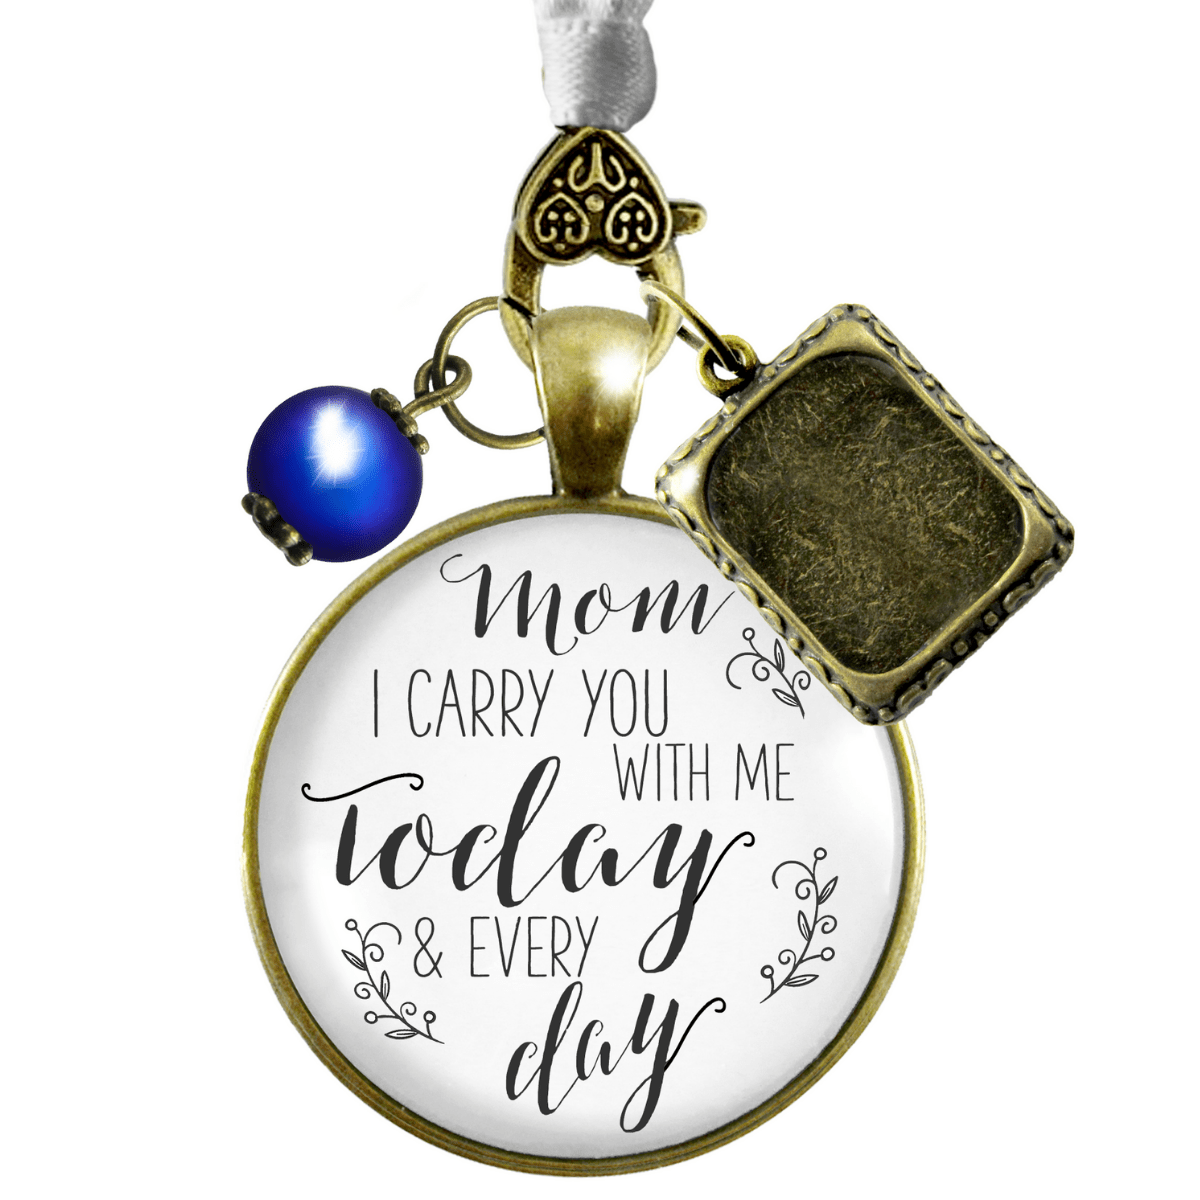 Mom I Carry You With Me Today and EVERY Day - BRONZE - WHITE - BLUE BEAD